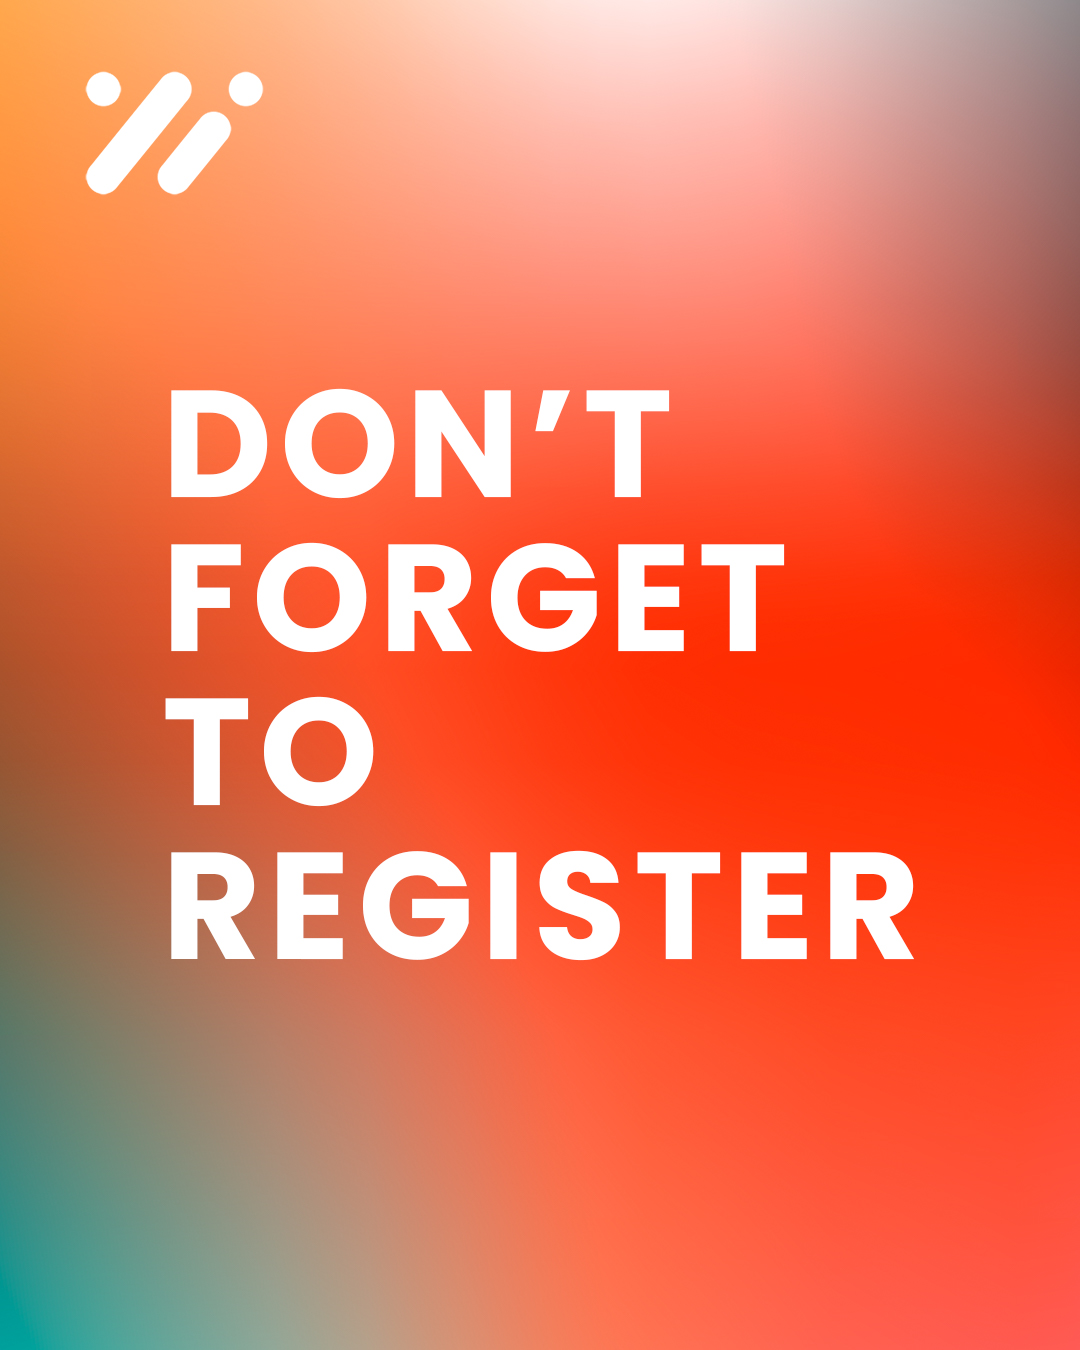 Don’t forget to register